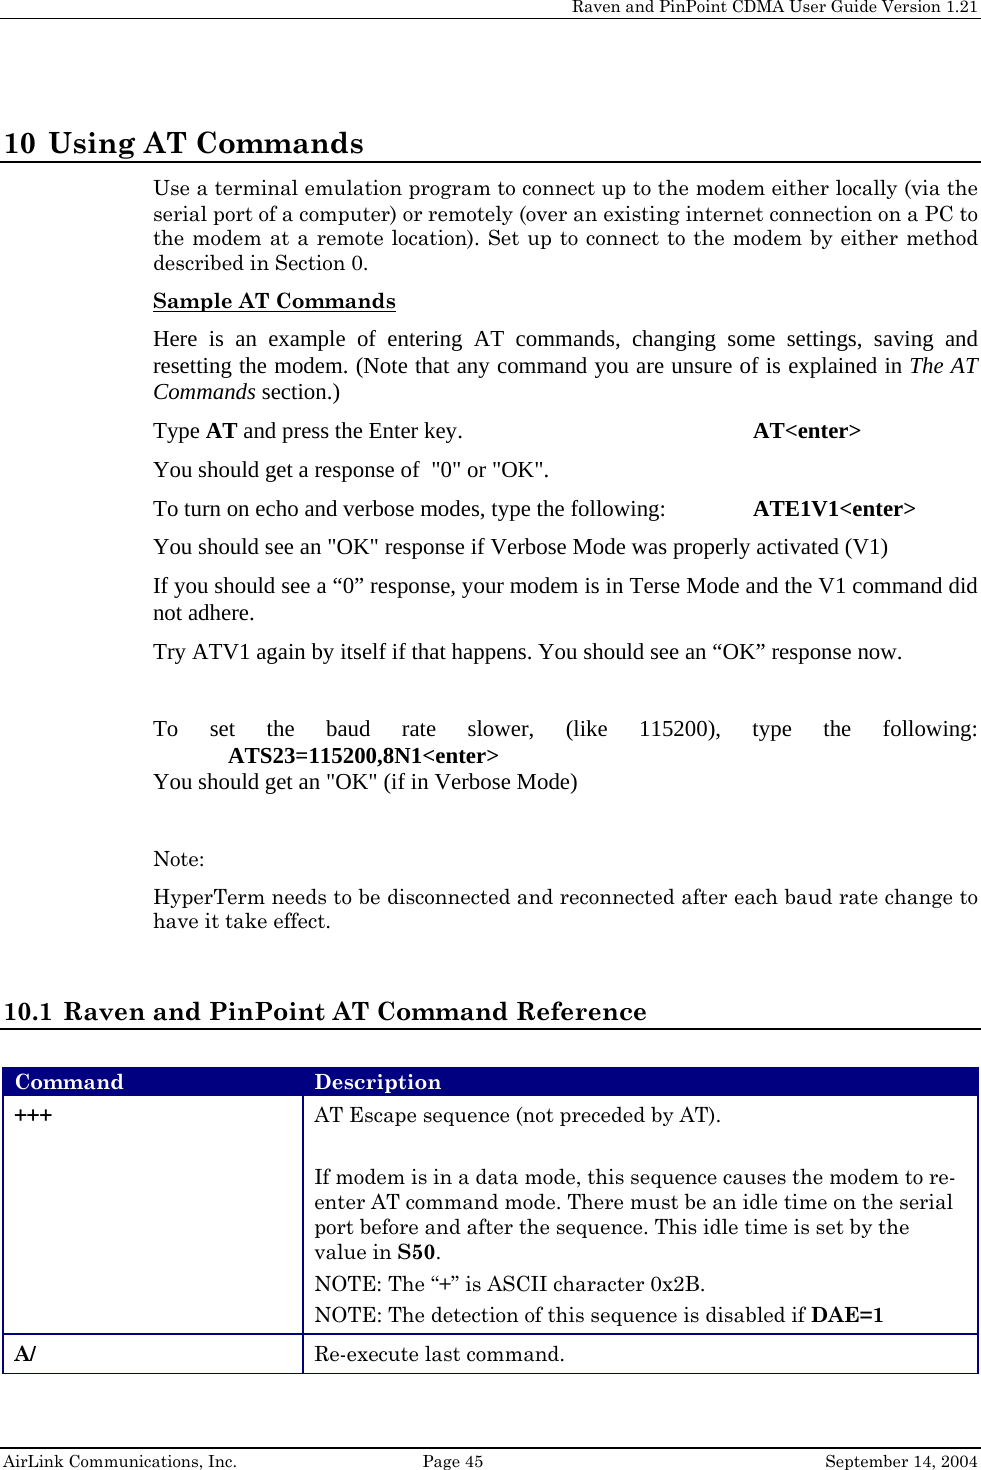     Raven and PinPoint CDMA User Guide Version 1.21  AirLink Communications, Inc.  Page 45  September 14, 2004 10 Using AT Commands Use a terminal emulation program to connect up to the modem either locally (via the serial port of a computer) or remotely (over an existing internet connection on a PC to the modem at a remote location). Set up to connect to the modem by either method described in Section 0. Sample AT Commands  Here is an example of entering AT commands, changing some settings, saving and resetting the modem. (Note that any command you are unsure of is explained in The AT Commands section.) Type AT and press the Enter key.         AT&lt;enter&gt; You should get a response of  &quot;0&quot; or &quot;OK&quot;. To turn on echo and verbose modes, type the following:     ATE1V1&lt;enter&gt; You should see an &quot;OK&quot; response if Verbose Mode was properly activated (V1) If you should see a “0” response, your modem is in Terse Mode and the V1 command did not adhere. Try ATV1 again by itself if that happens. You should see an “OK” response now.  To set the baud rate slower, (like 115200), type the following: ATS23=115200,8N1&lt;enter&gt; You should get an &quot;OK&quot; (if in Verbose Mode)  Note:  HyperTerm needs to be disconnected and reconnected after each baud rate change to have it take effect.  10.1 Raven and PinPoint AT Command Reference  Command  Description +++  AT Escape sequence (not preceded by AT).  If modem is in a data mode, this sequence causes the modem to re-enter AT command mode. There must be an idle time on the serial port before and after the sequence. This idle time is set by the value in S50.  NOTE: The “+” is ASCII character 0x2B. NOTE: The detection of this sequence is disabled if DAE=1 A/  Re-execute last command. 